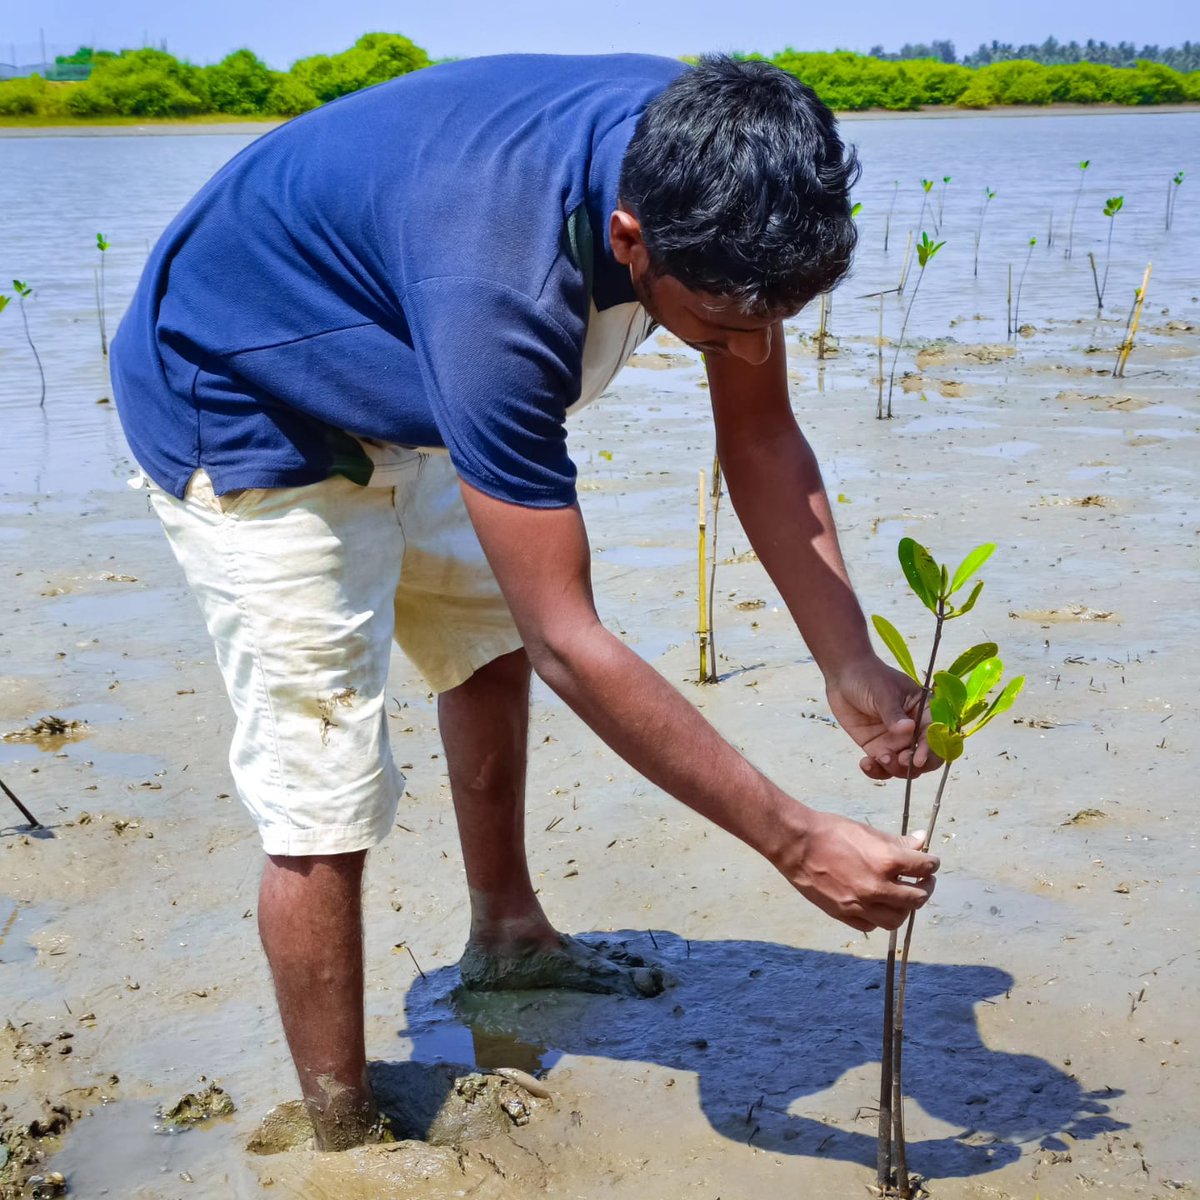 Protecting our coasts, one Mangrove at a time: Join us in the fight against climate change by planting Mangroves for coastal resilience. 

#MangrovesForClimate 🌱
#CoastalResilience
#RestoreOurCoasts
#BlueCarbon
#NatureBasedSolutions #ClimateAdaptation

@SatpathyLive @YuWaahIndia